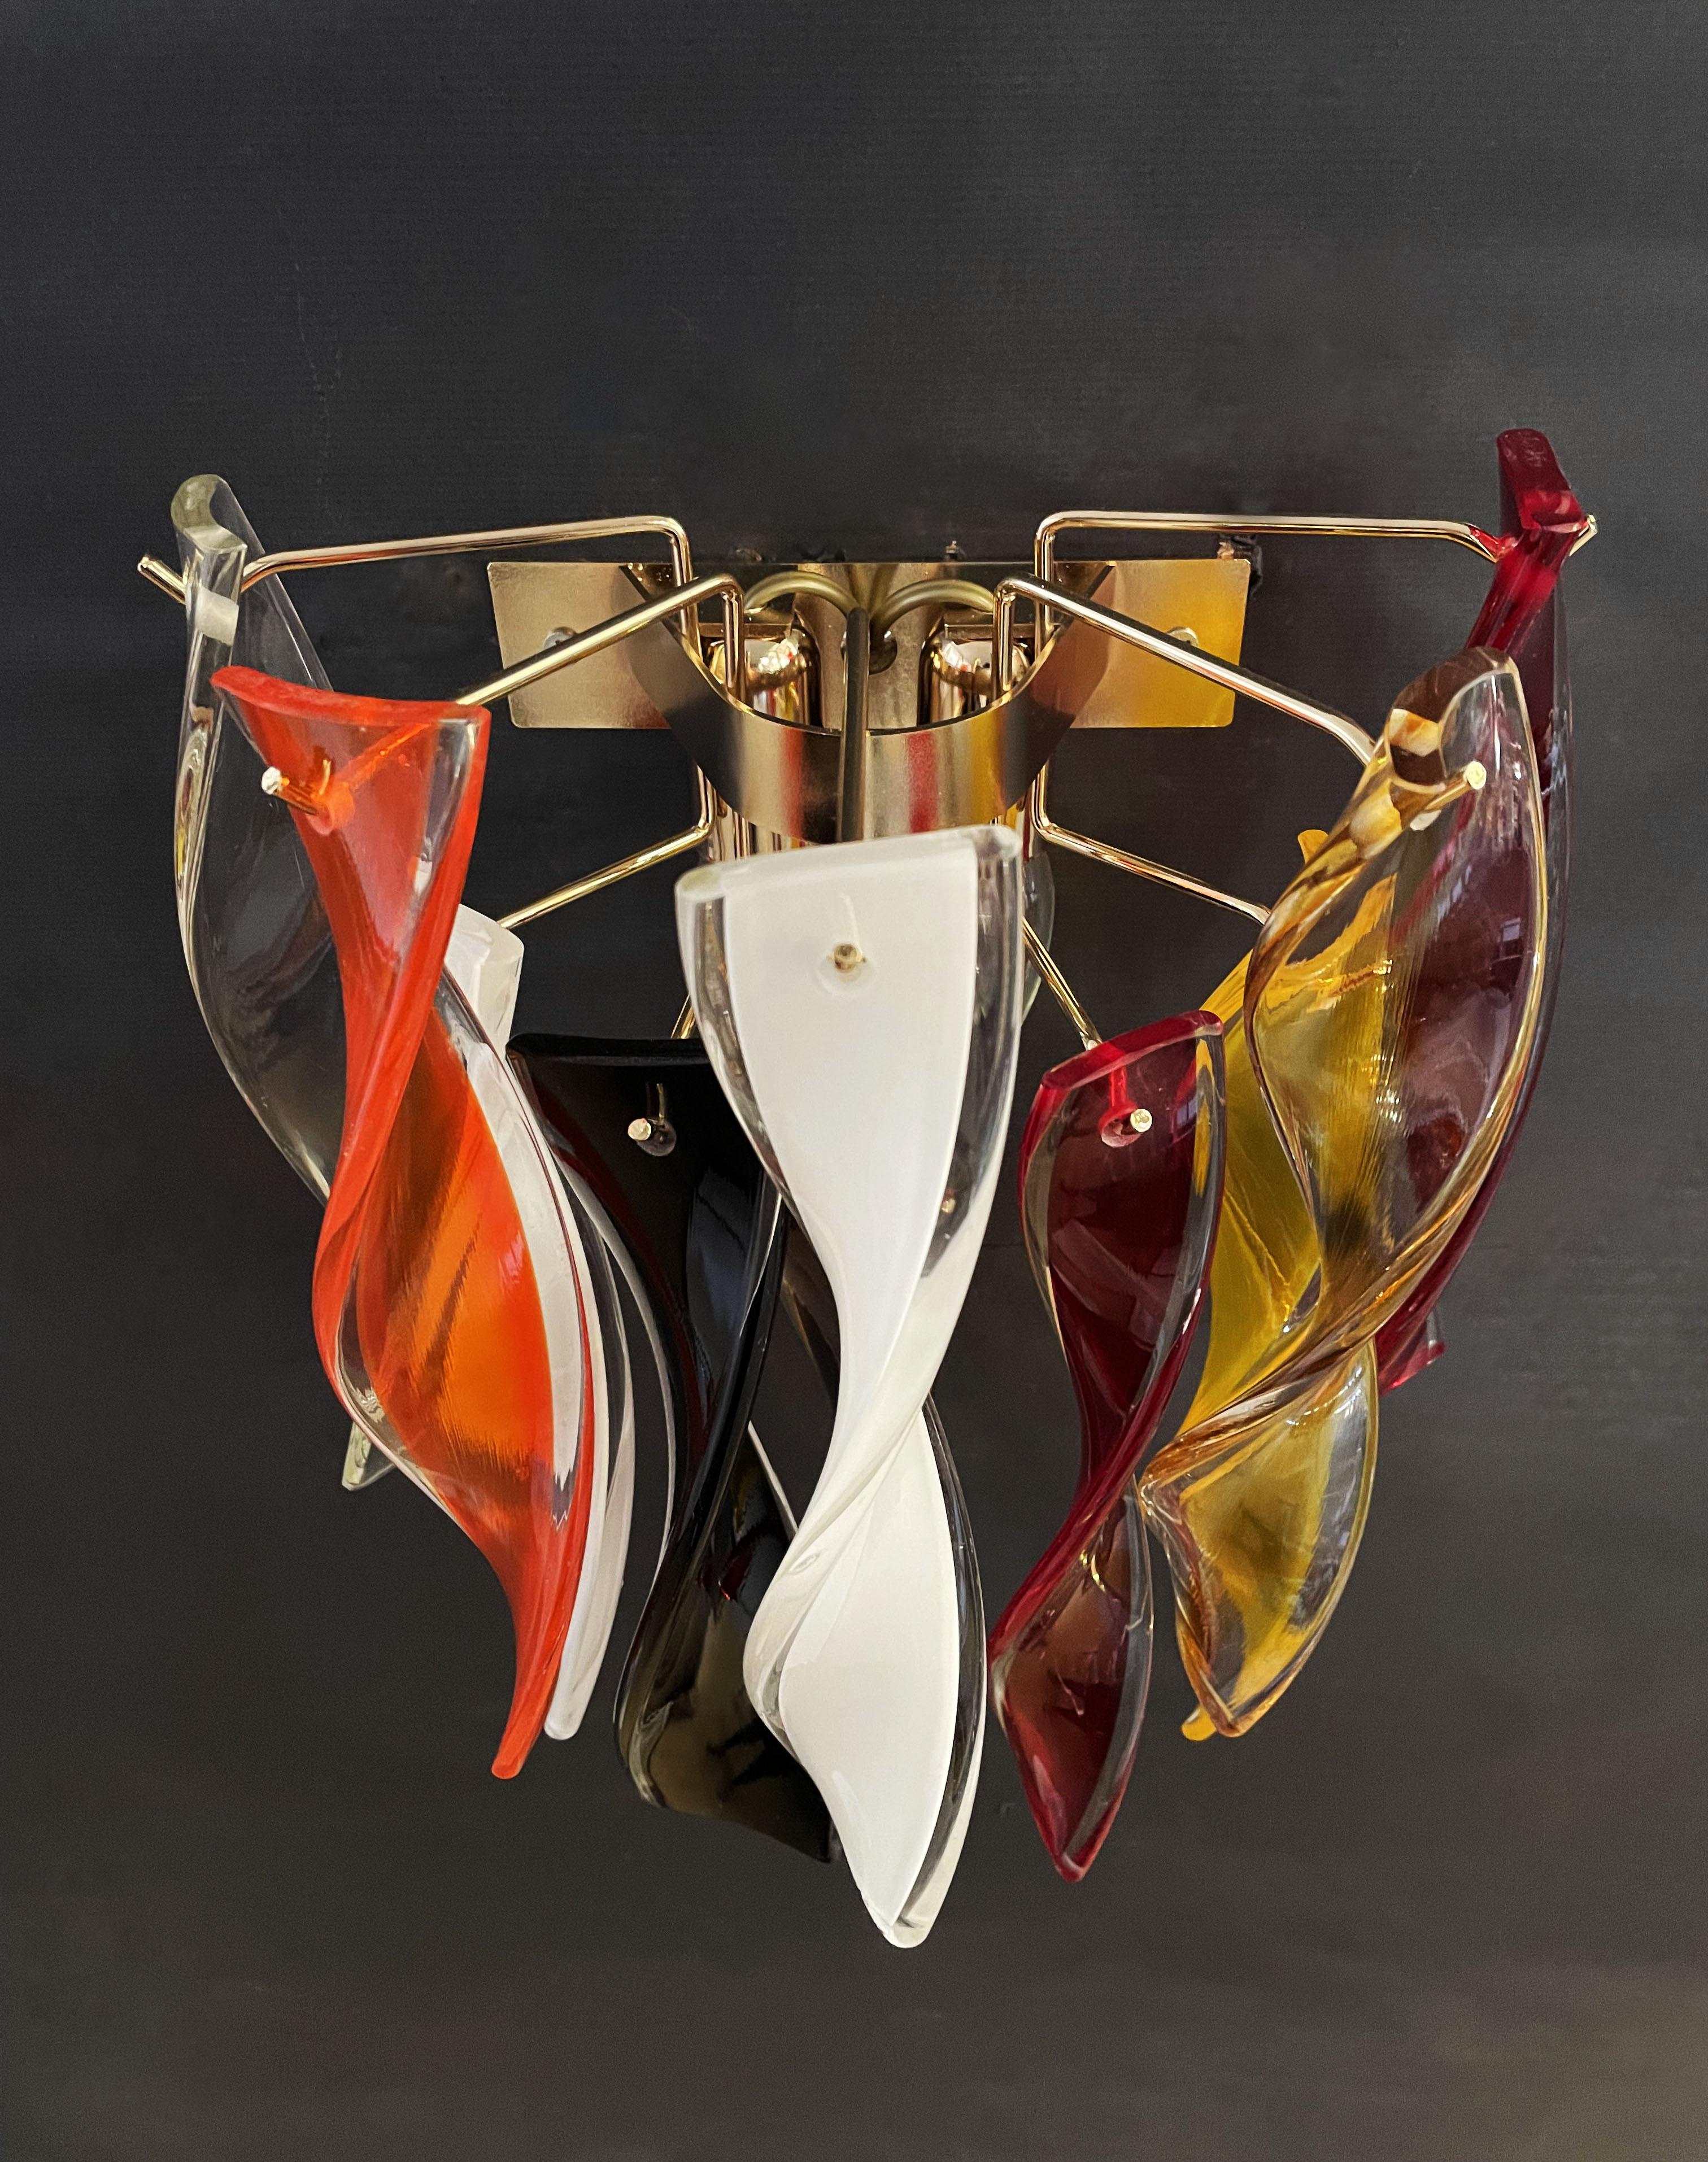 Pair of appliques with 10 pendants in colored Murano glass covered with crystal and hand-twisted in various colors. Gold-plated structure.
Period: late XX century
Dimensions: 15,75 inches (40 cm) height; 11,80 inches (30 cm) width; 7,10 inches (18